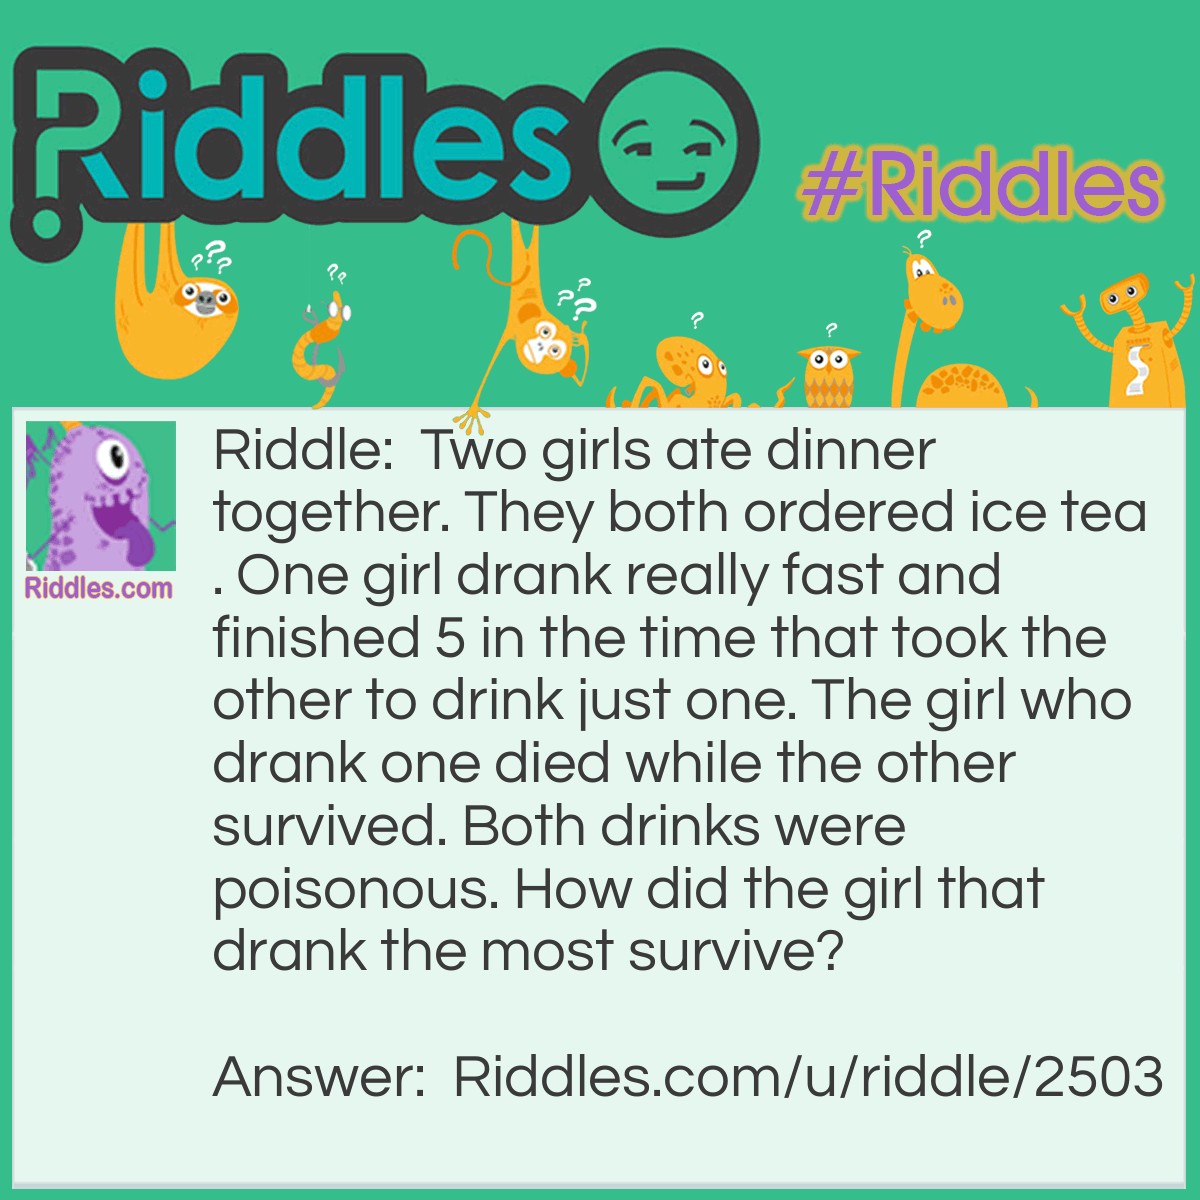 Riddle: Two girls ate dinner together. They both ordered ice tea. One girl drank really fast and finished 5 in the time that took the other to drink just one. The girl who drank one died while the other survived. Both drinks were poisonous. How did the girl that drank the most survive? Answer: The poison was in the ice, as she slowly drank her one drink, the melting ice released the poison.